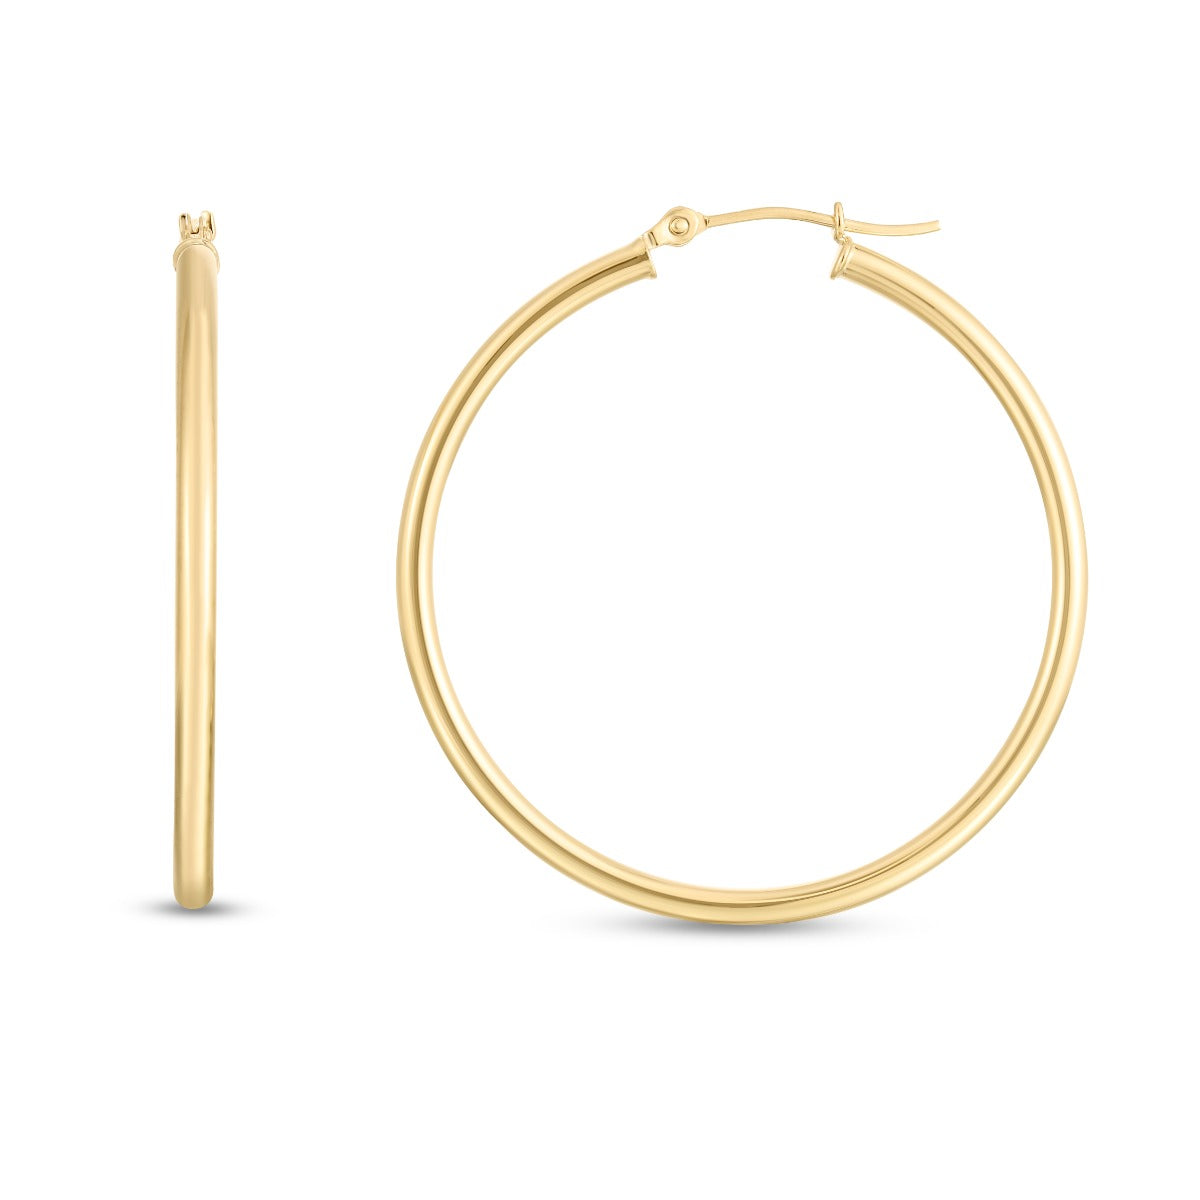 14K Gold Polished Round Hoop Earrings with Hinged Clasp